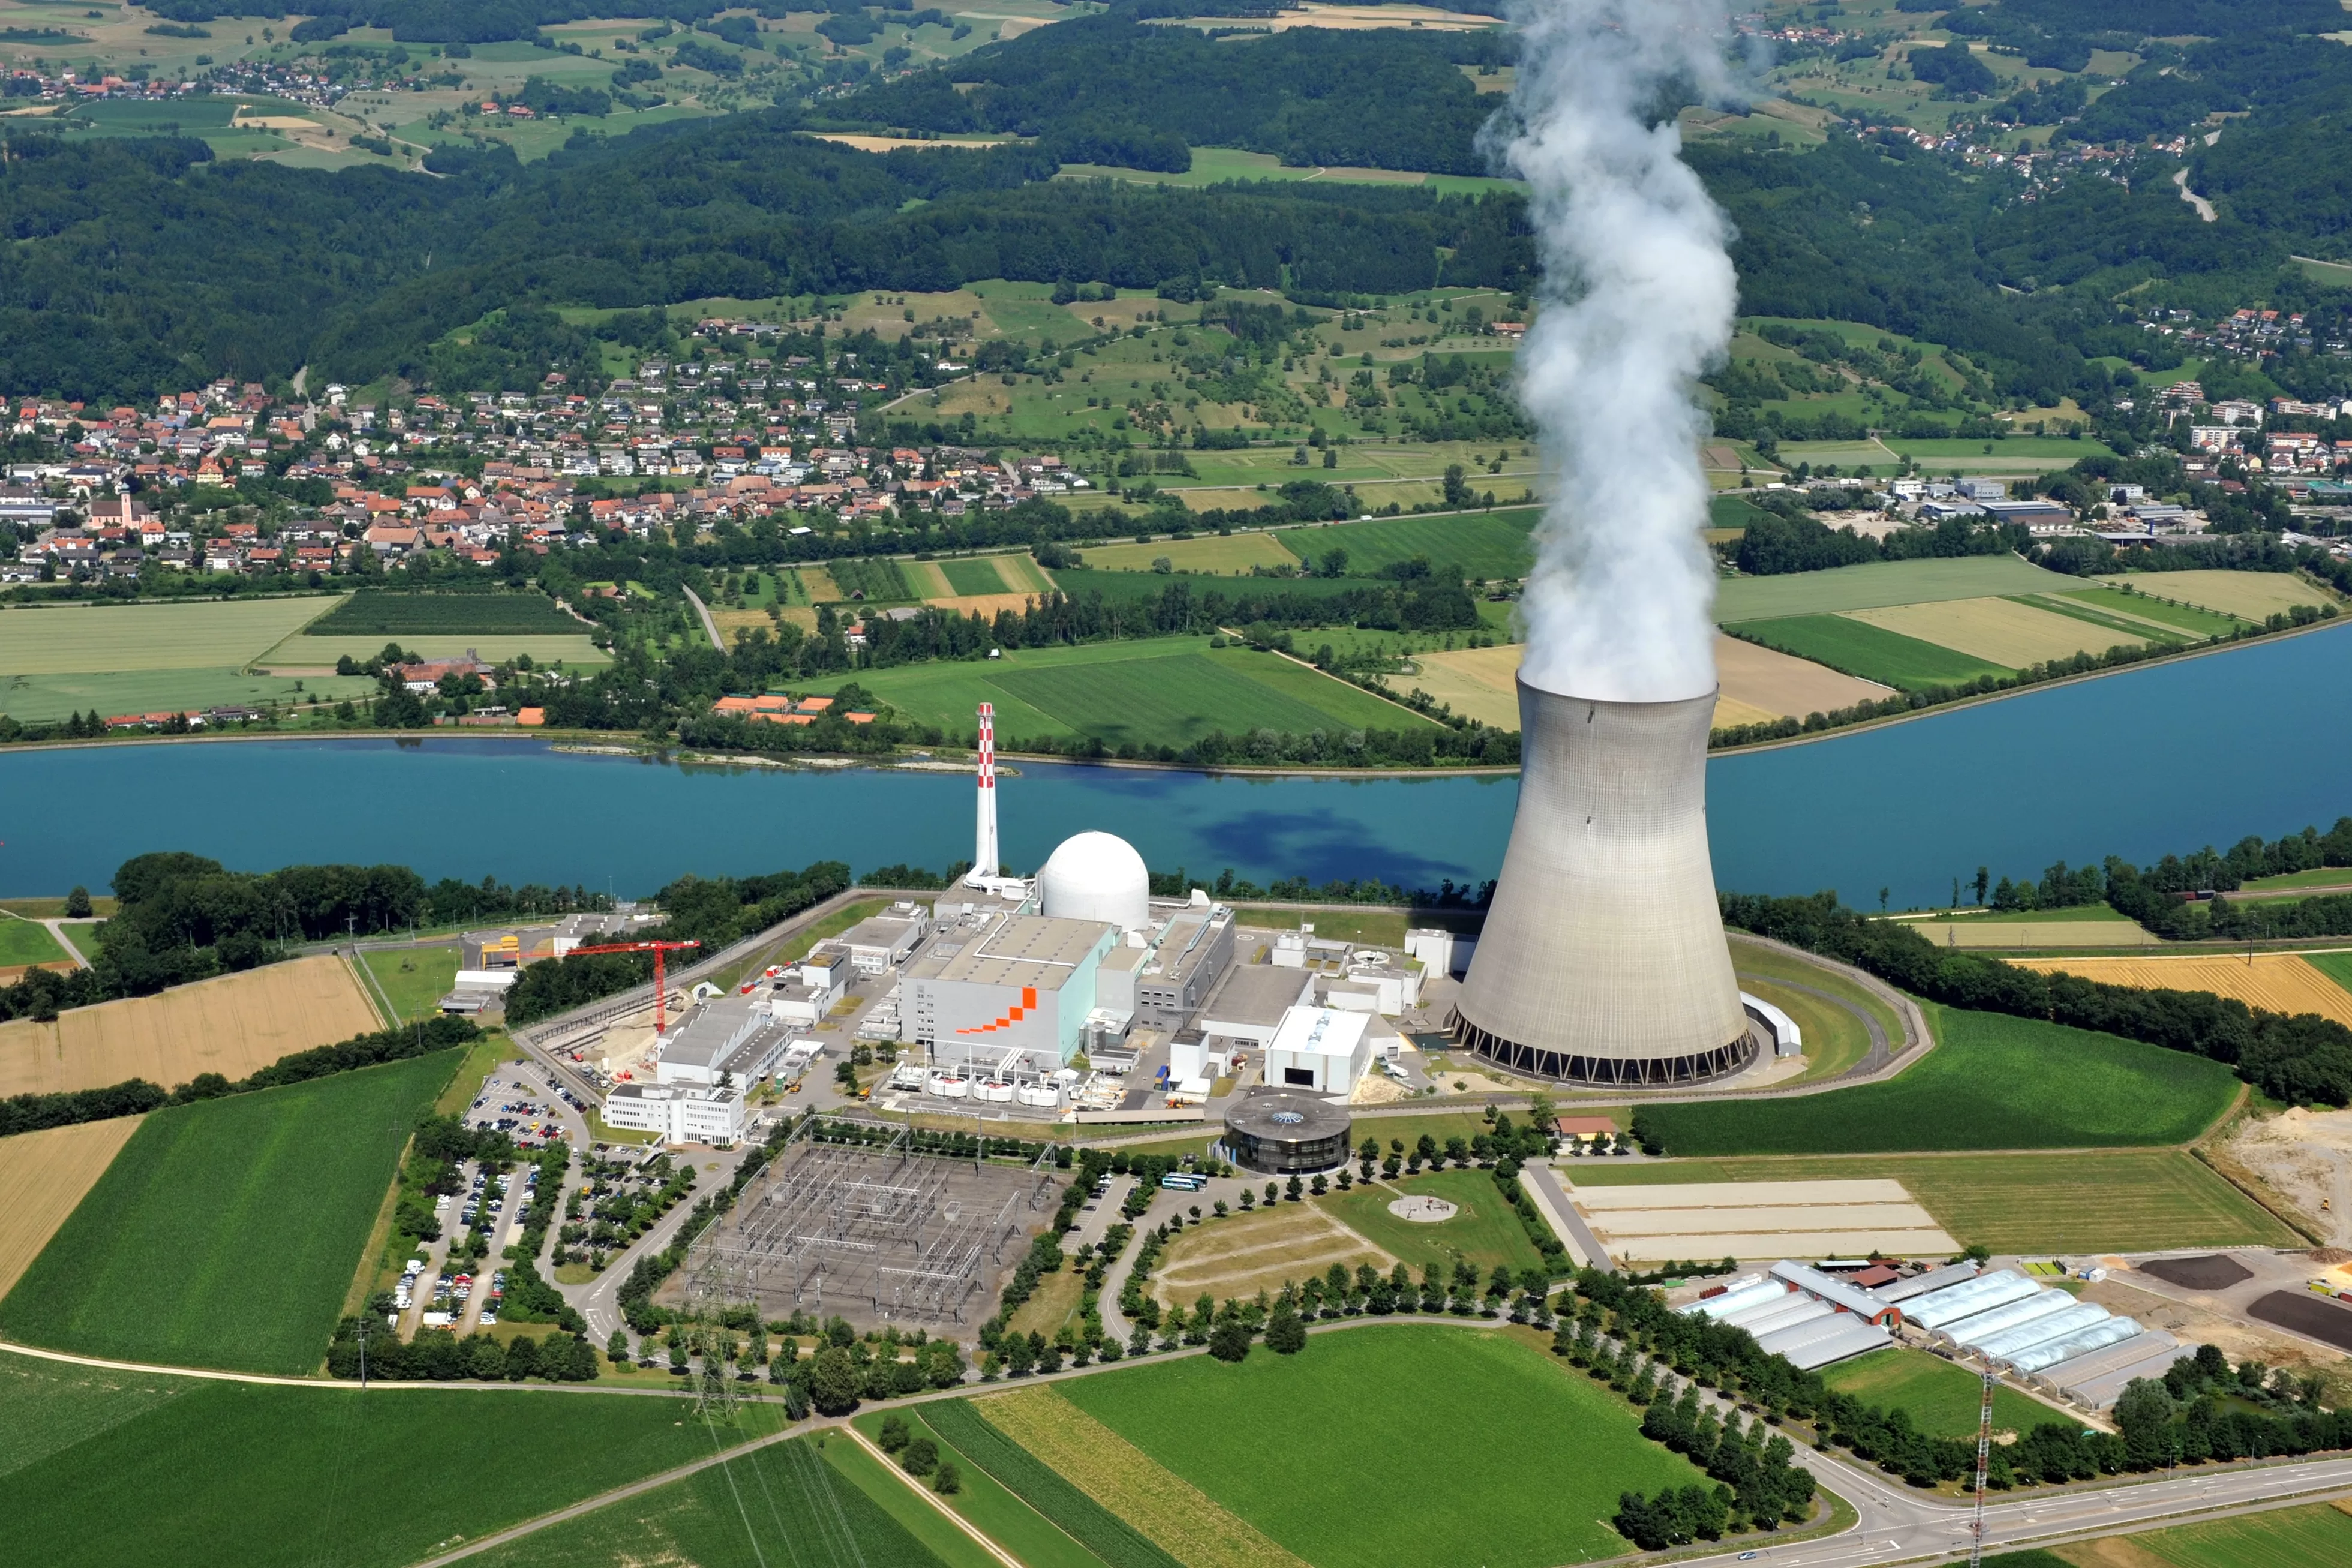 One of Switzerland’s nuclear reactors is located in Leibstadt. The reactor is inside the hemispherical building.